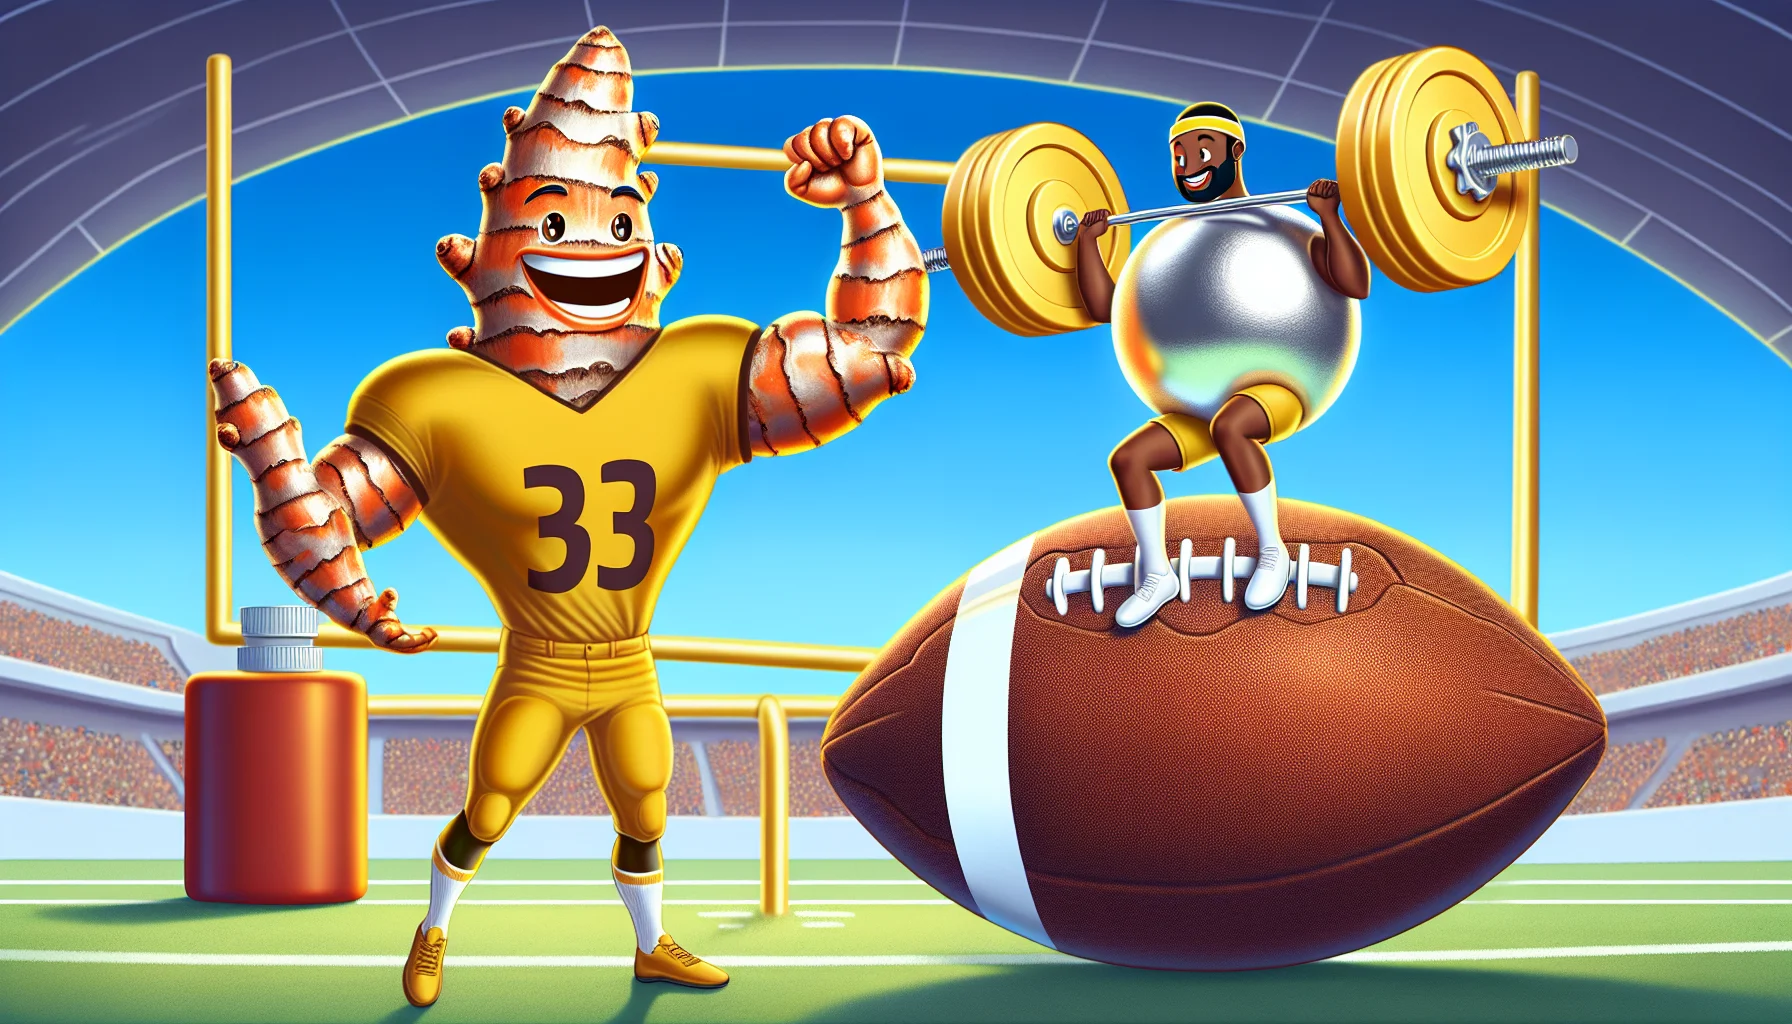 Illustrate an amusing situation set in a sports-oriented environment. In this scene, a large golden turmeric root and a glowing silver-white magnesium element are portrayed as animated, personified characters. The turmeric, portrayed as an agile, Hispanic male in a football uniform, is effortlessly sailing a giant football into the field goal. Magnesium, depicted as a strong, Black female weightlifter, is lifting a colossal barbell with a smile. Both are conversing cheerily, indicating their strength and performance benefits, hence encouraging the audience about the usefulness of turmeric and magnesium supplements in sports.